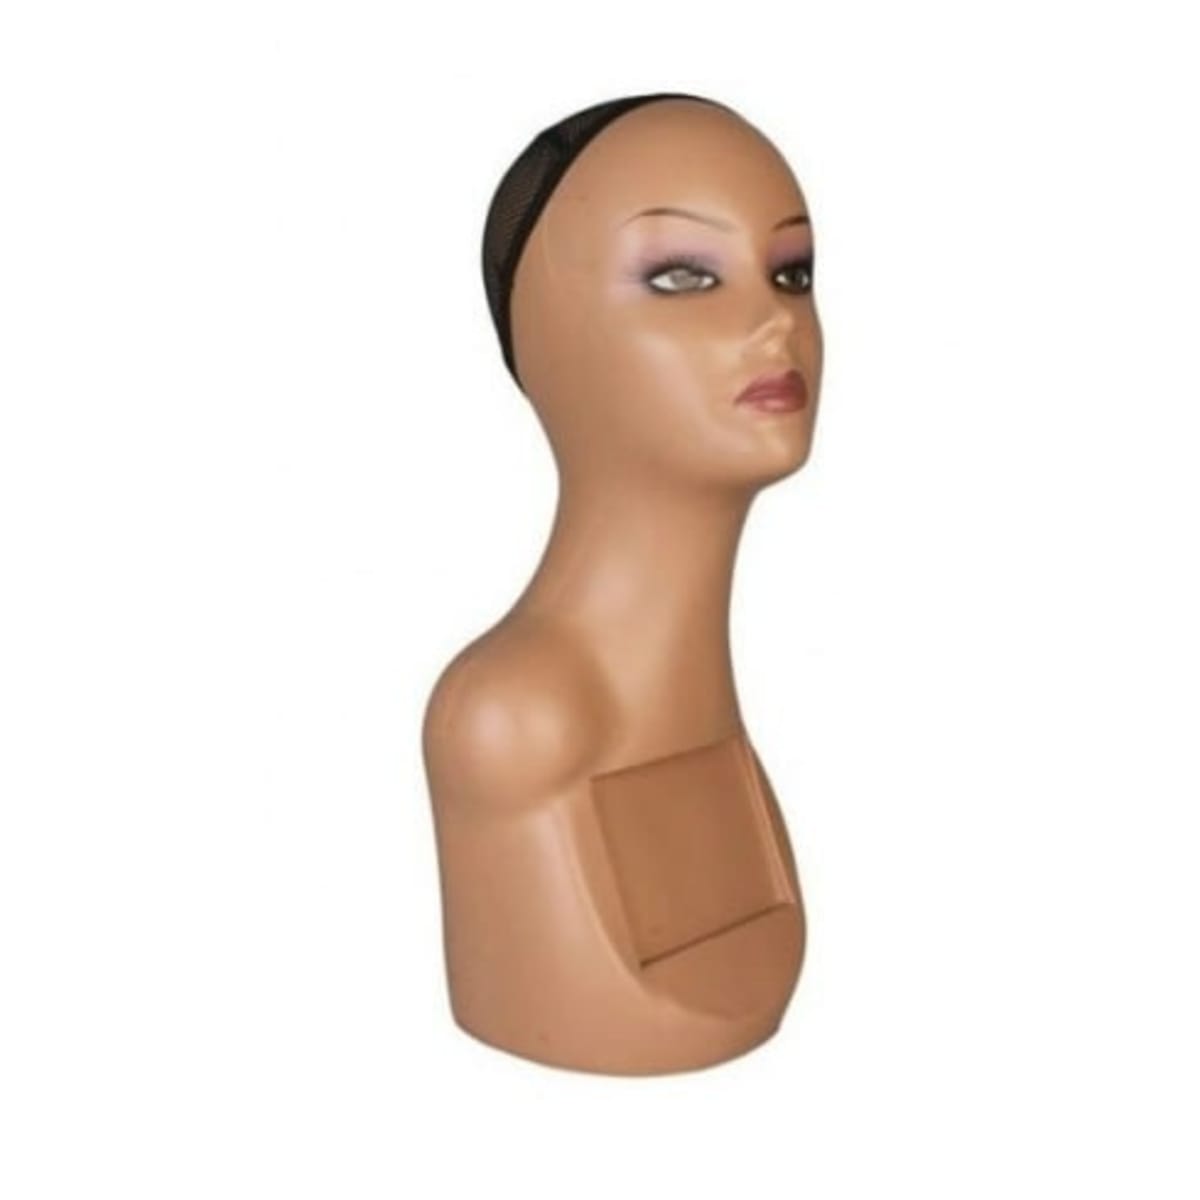 Mannequin Head For Wig Making & Display